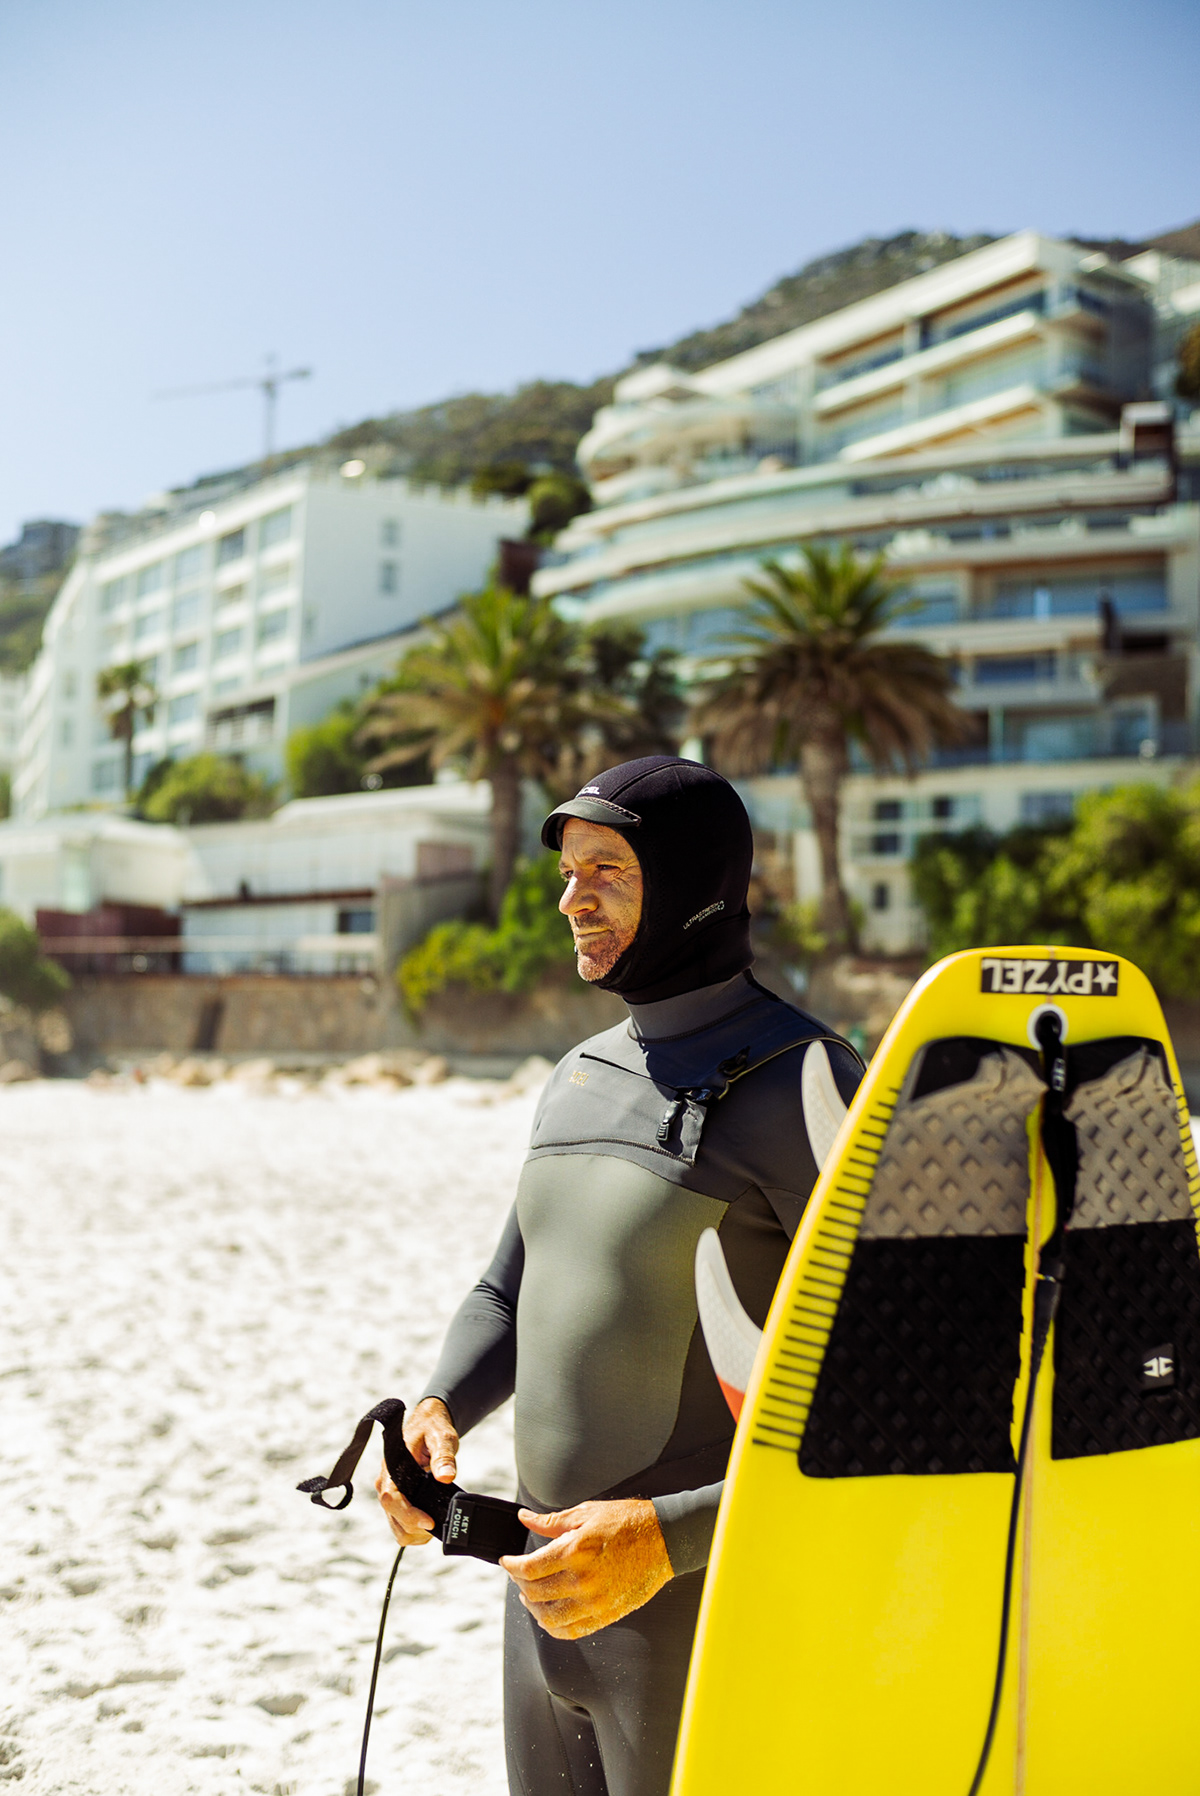 capetown reportage adventure southafrica leicam Leica surfing Surf lightroom Photography 